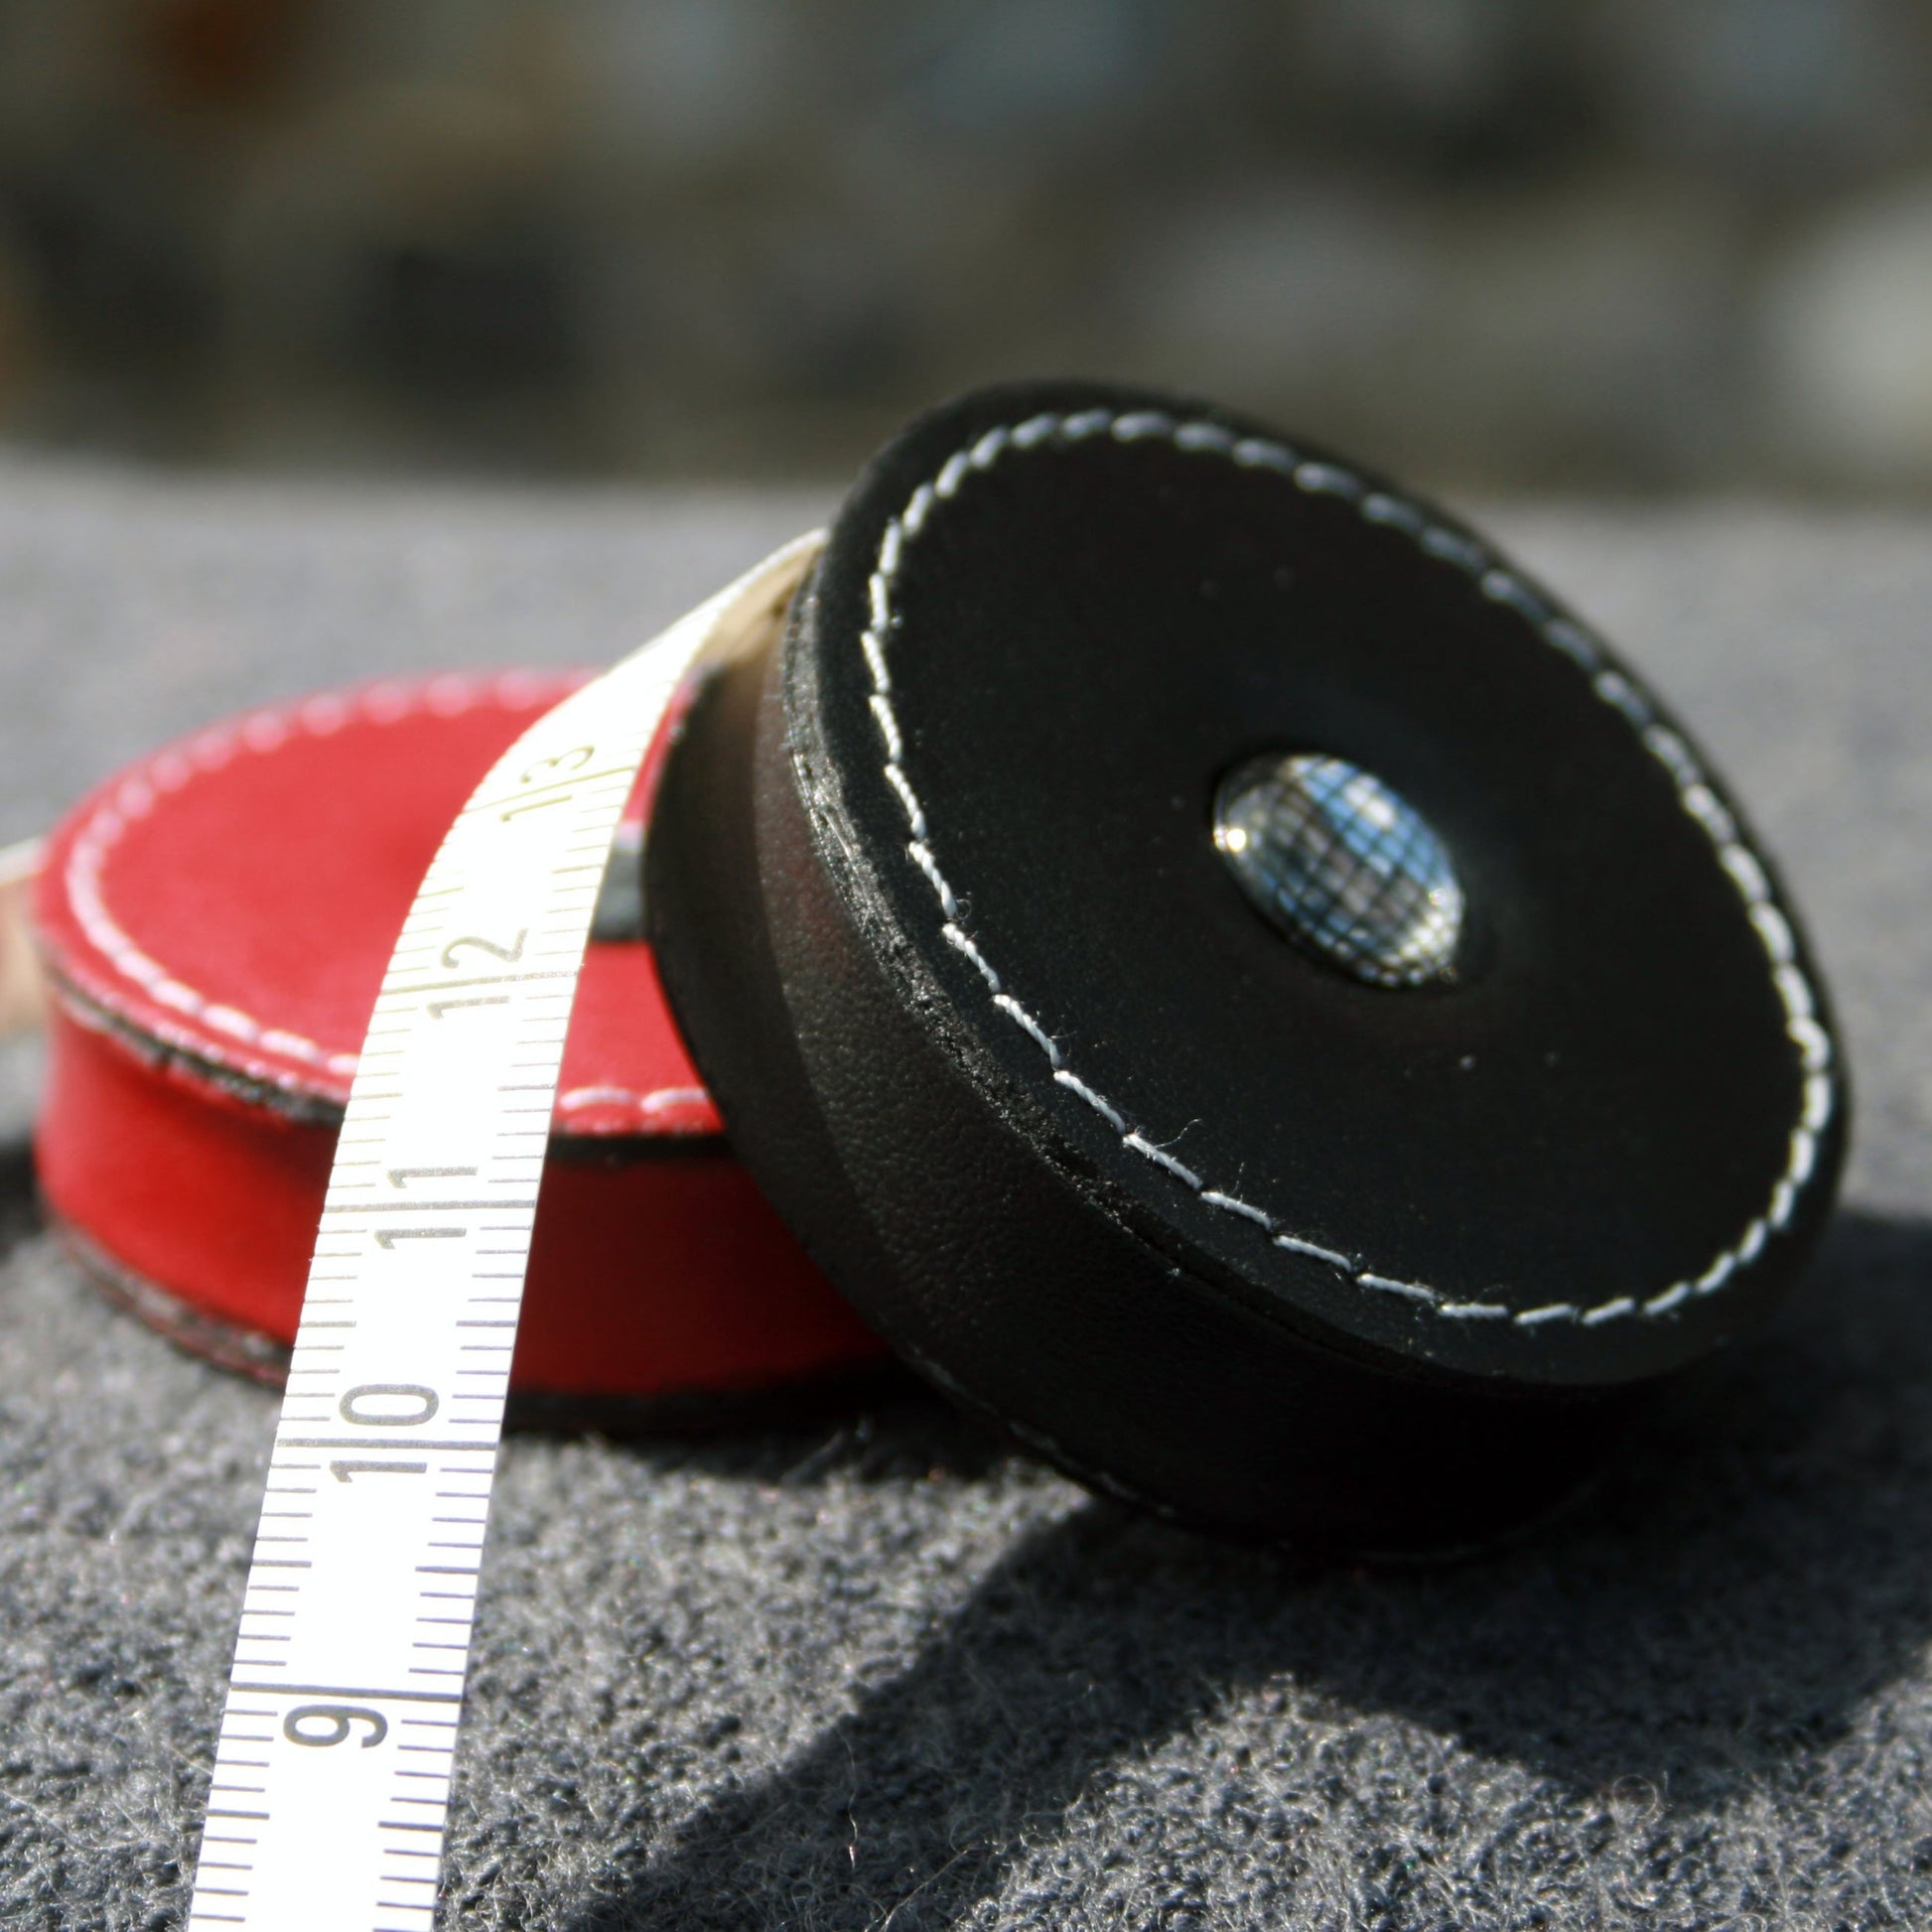 Sew Delicious Retractable Leather Tape Measures